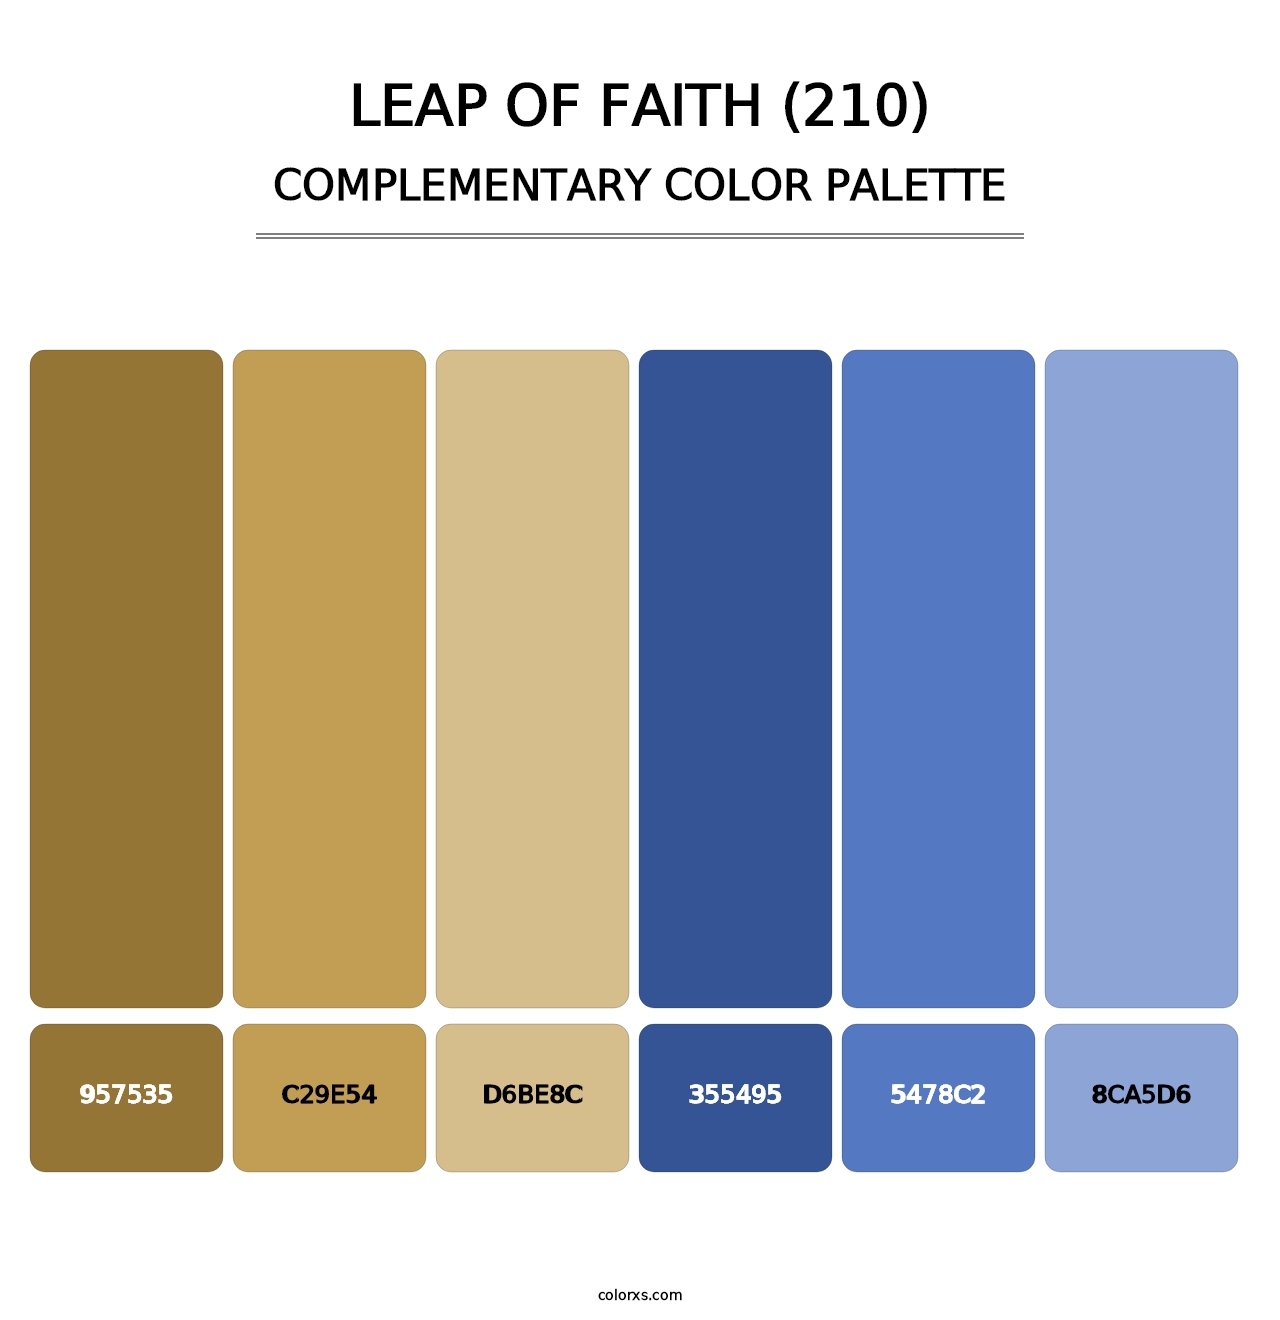 Leap of Faith (210) - Complementary Color Palette